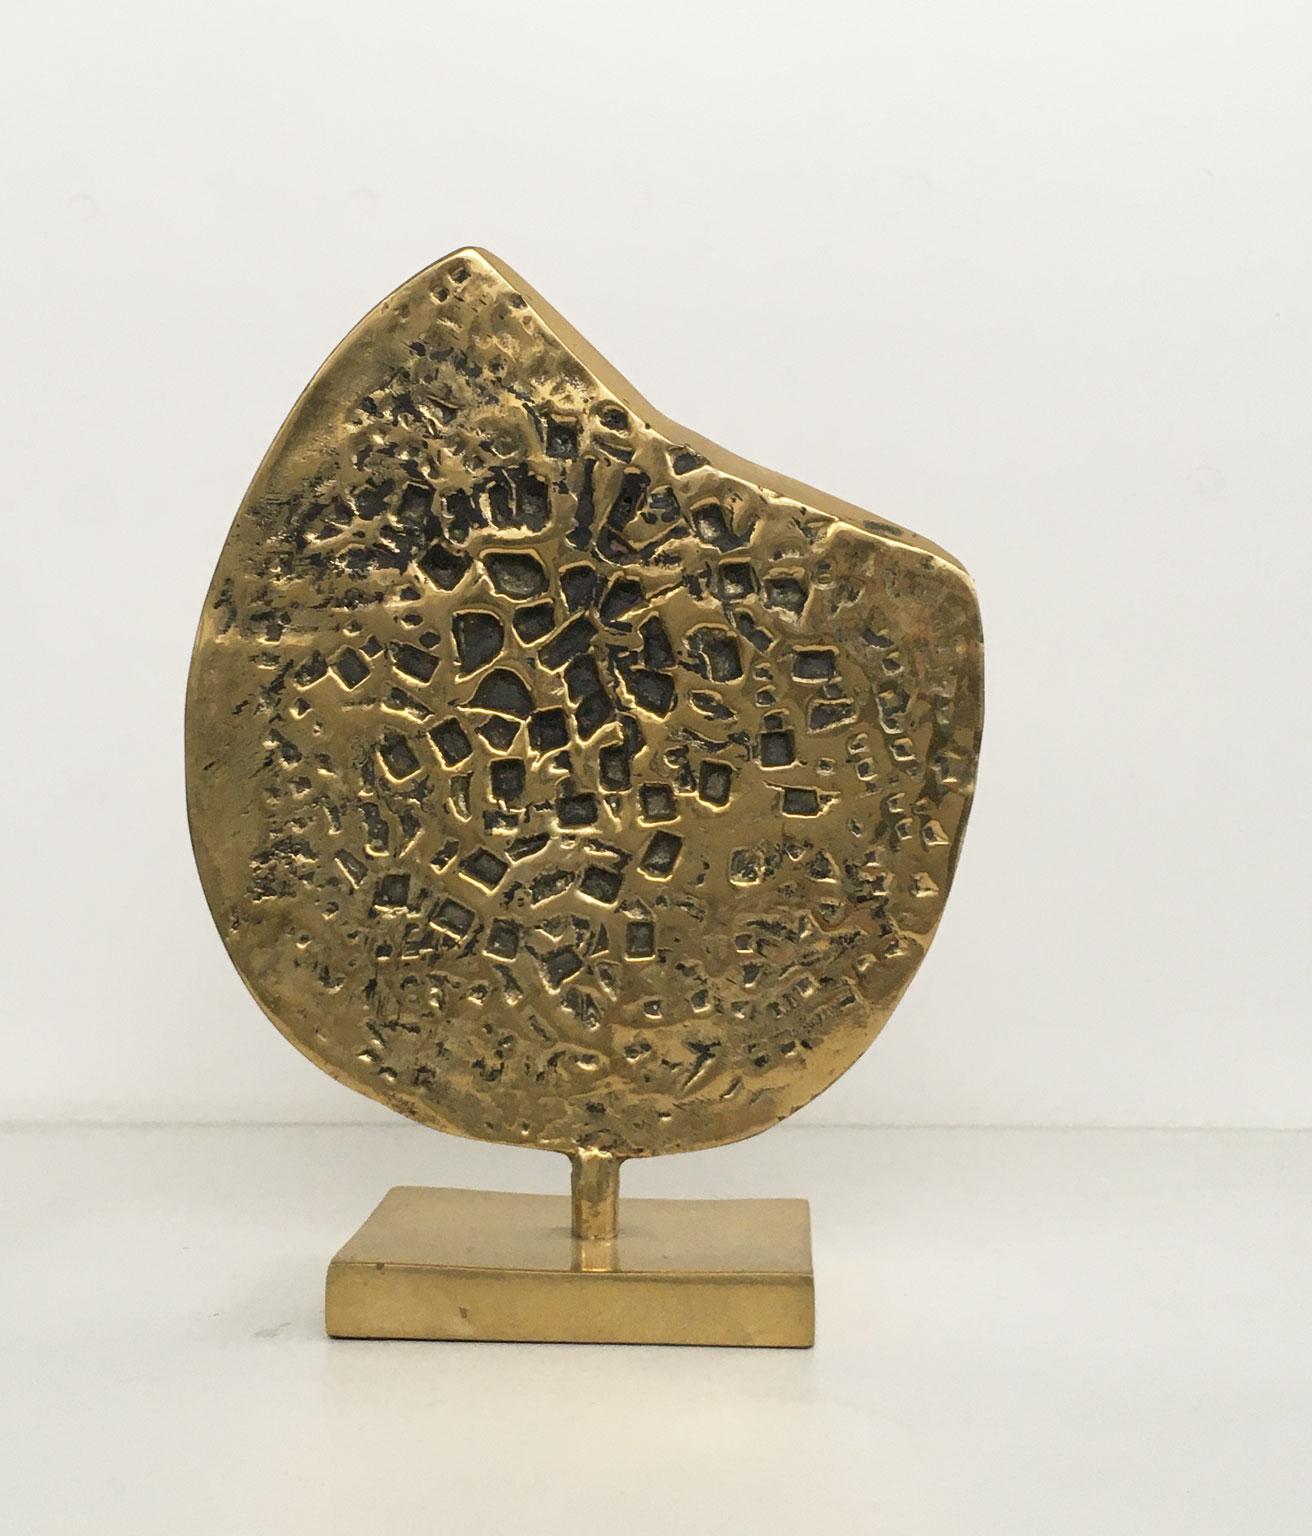 1980 Italy Bronze Abstract Sculpture by Lino Tiné Albero Città City Tree For Sale 2